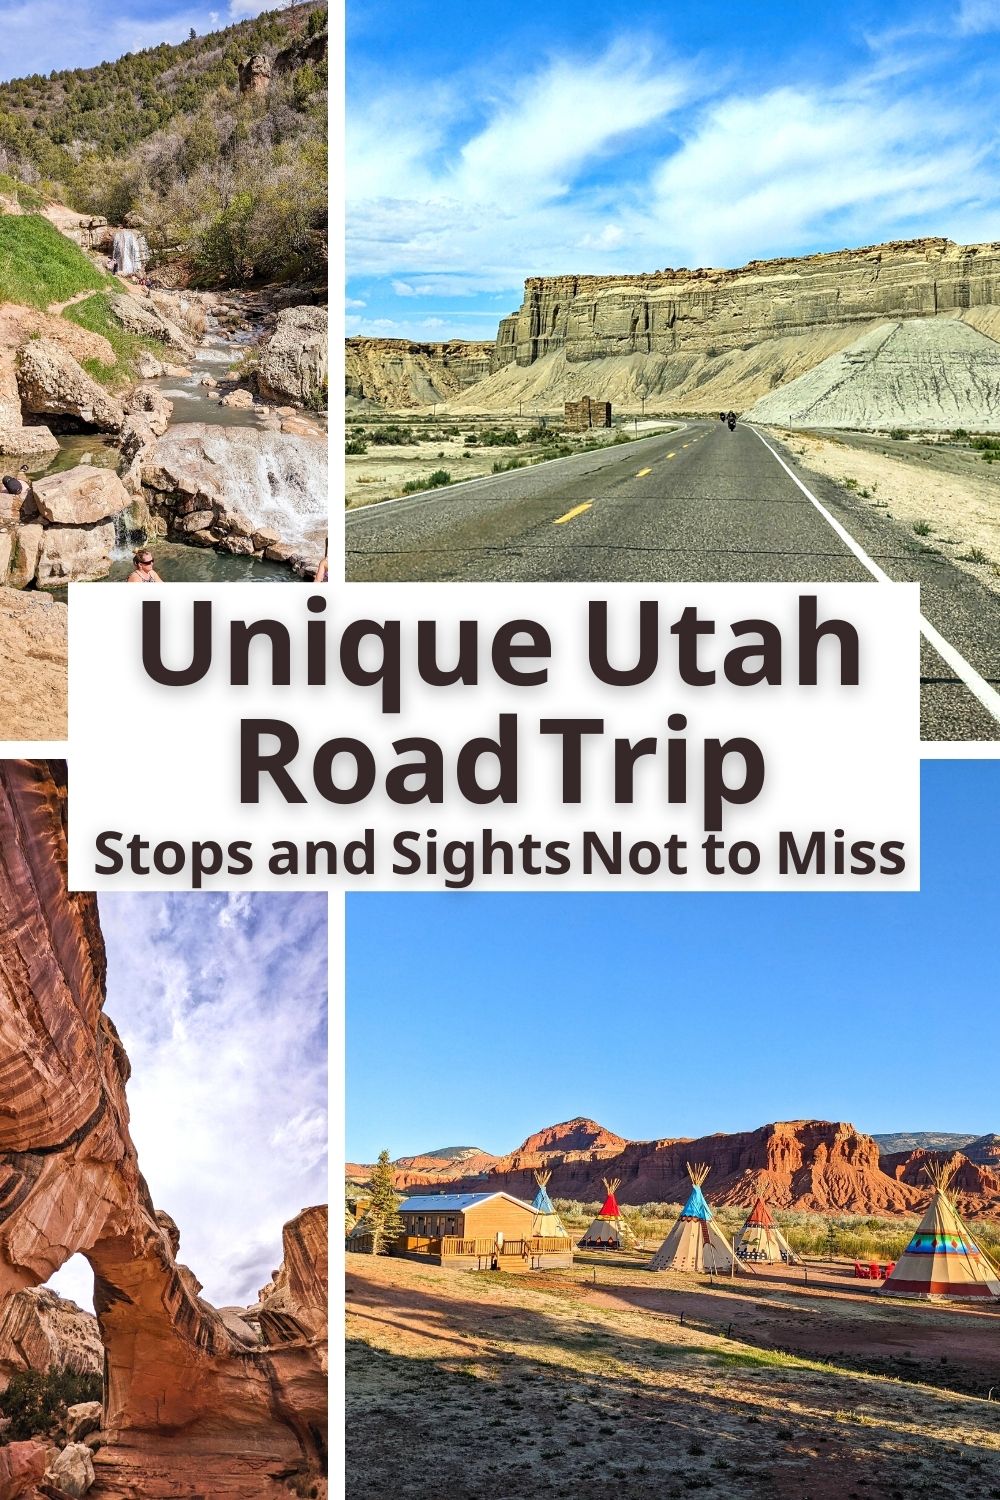 There are so many unique Utah road trip stops to make, but what to choose? We've picked our favorite sights and hikes that are great with kids and perfect for both adventure and learning. Lesser known road trip stops that will make you fall in love with Utah.